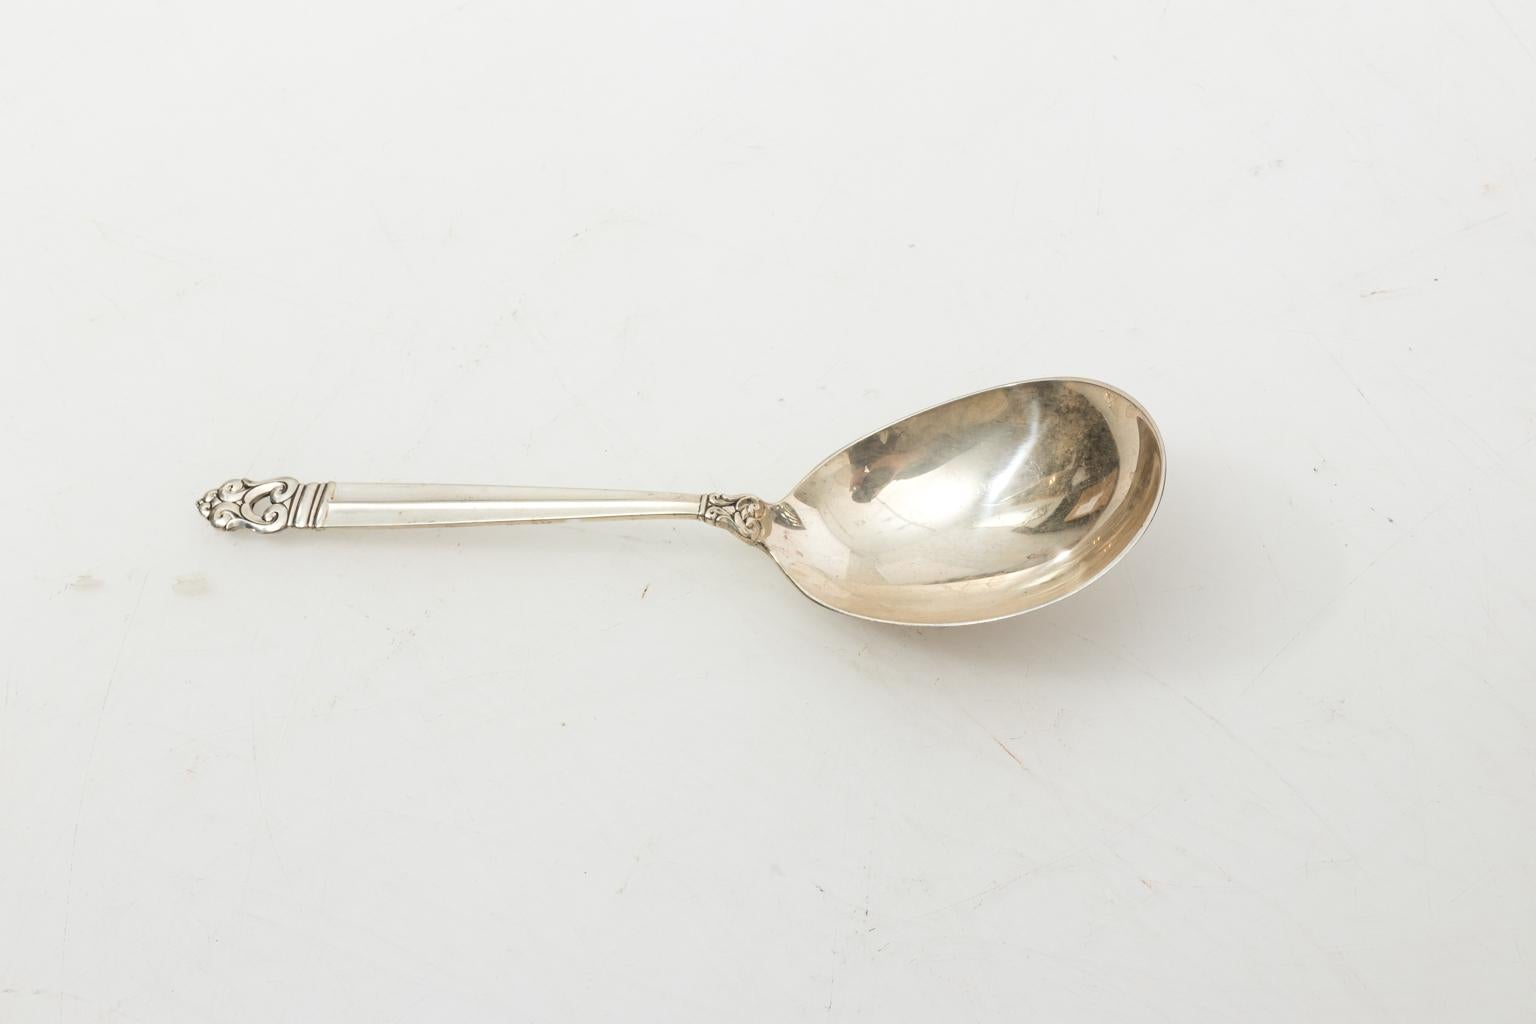 20th Century Sterling Silver Flatware by Royal Danish